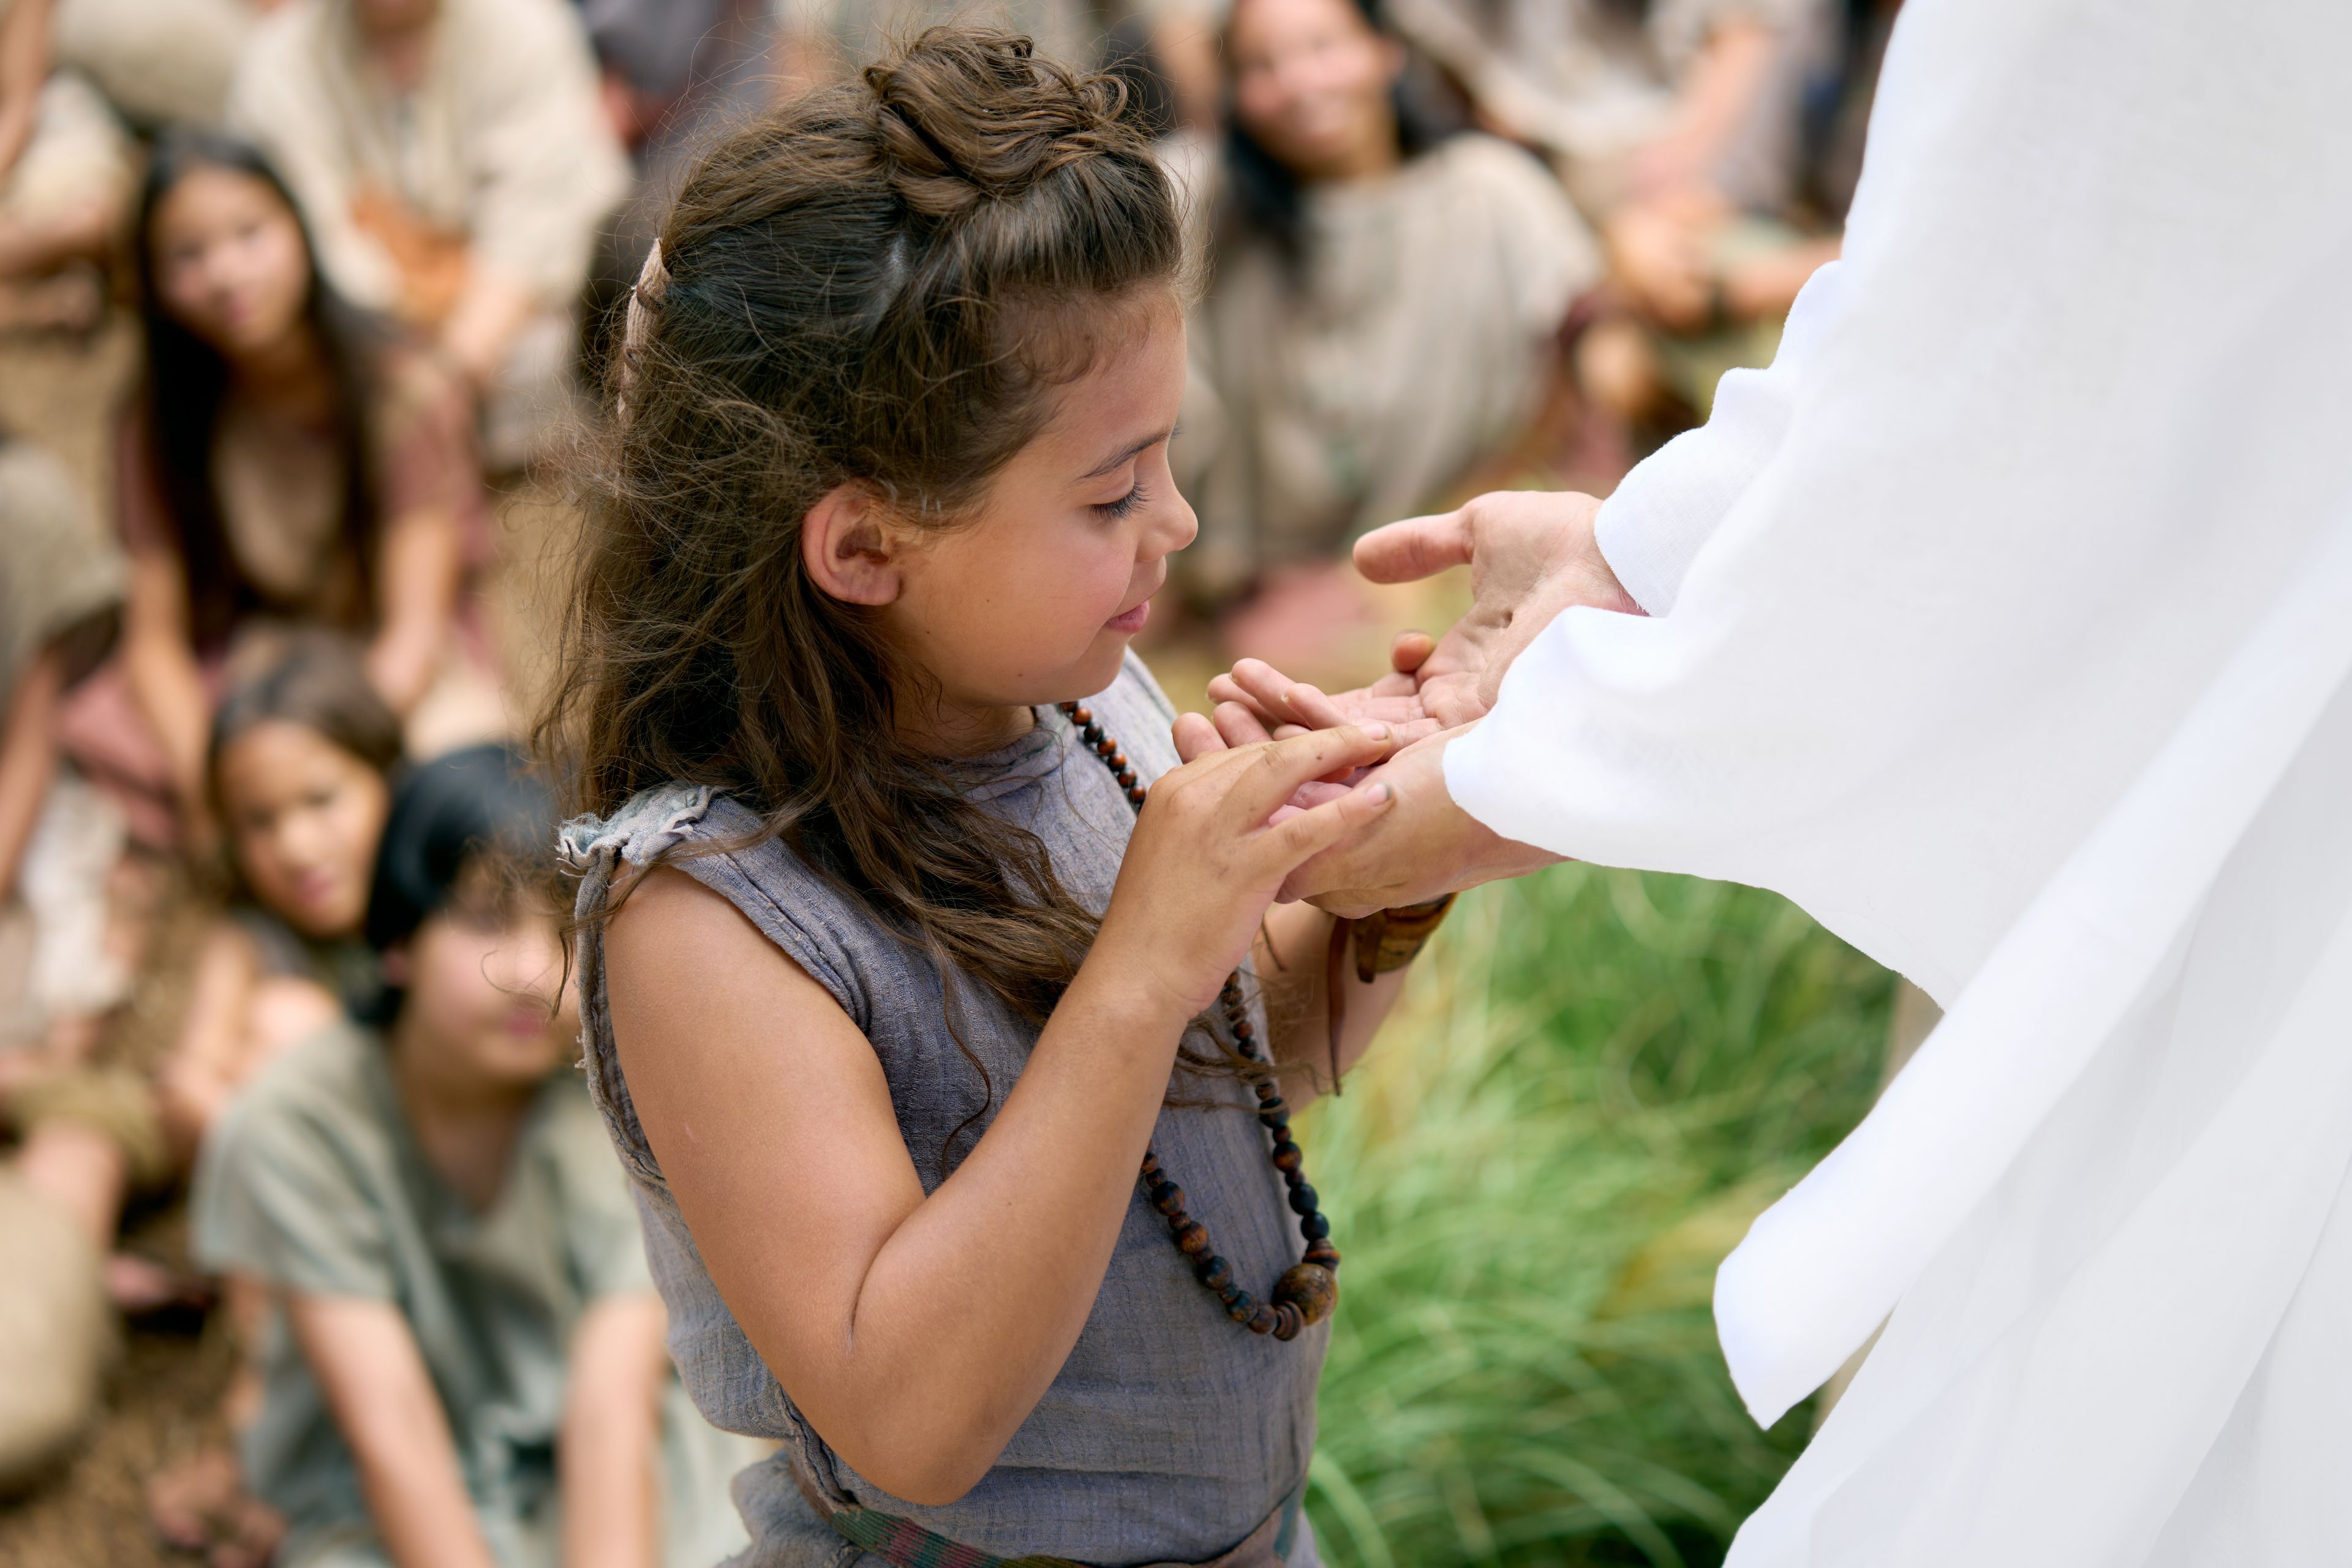 A young girl looks at the marks of the nails in the resurrected Savior, Jesus Christ's, hands.